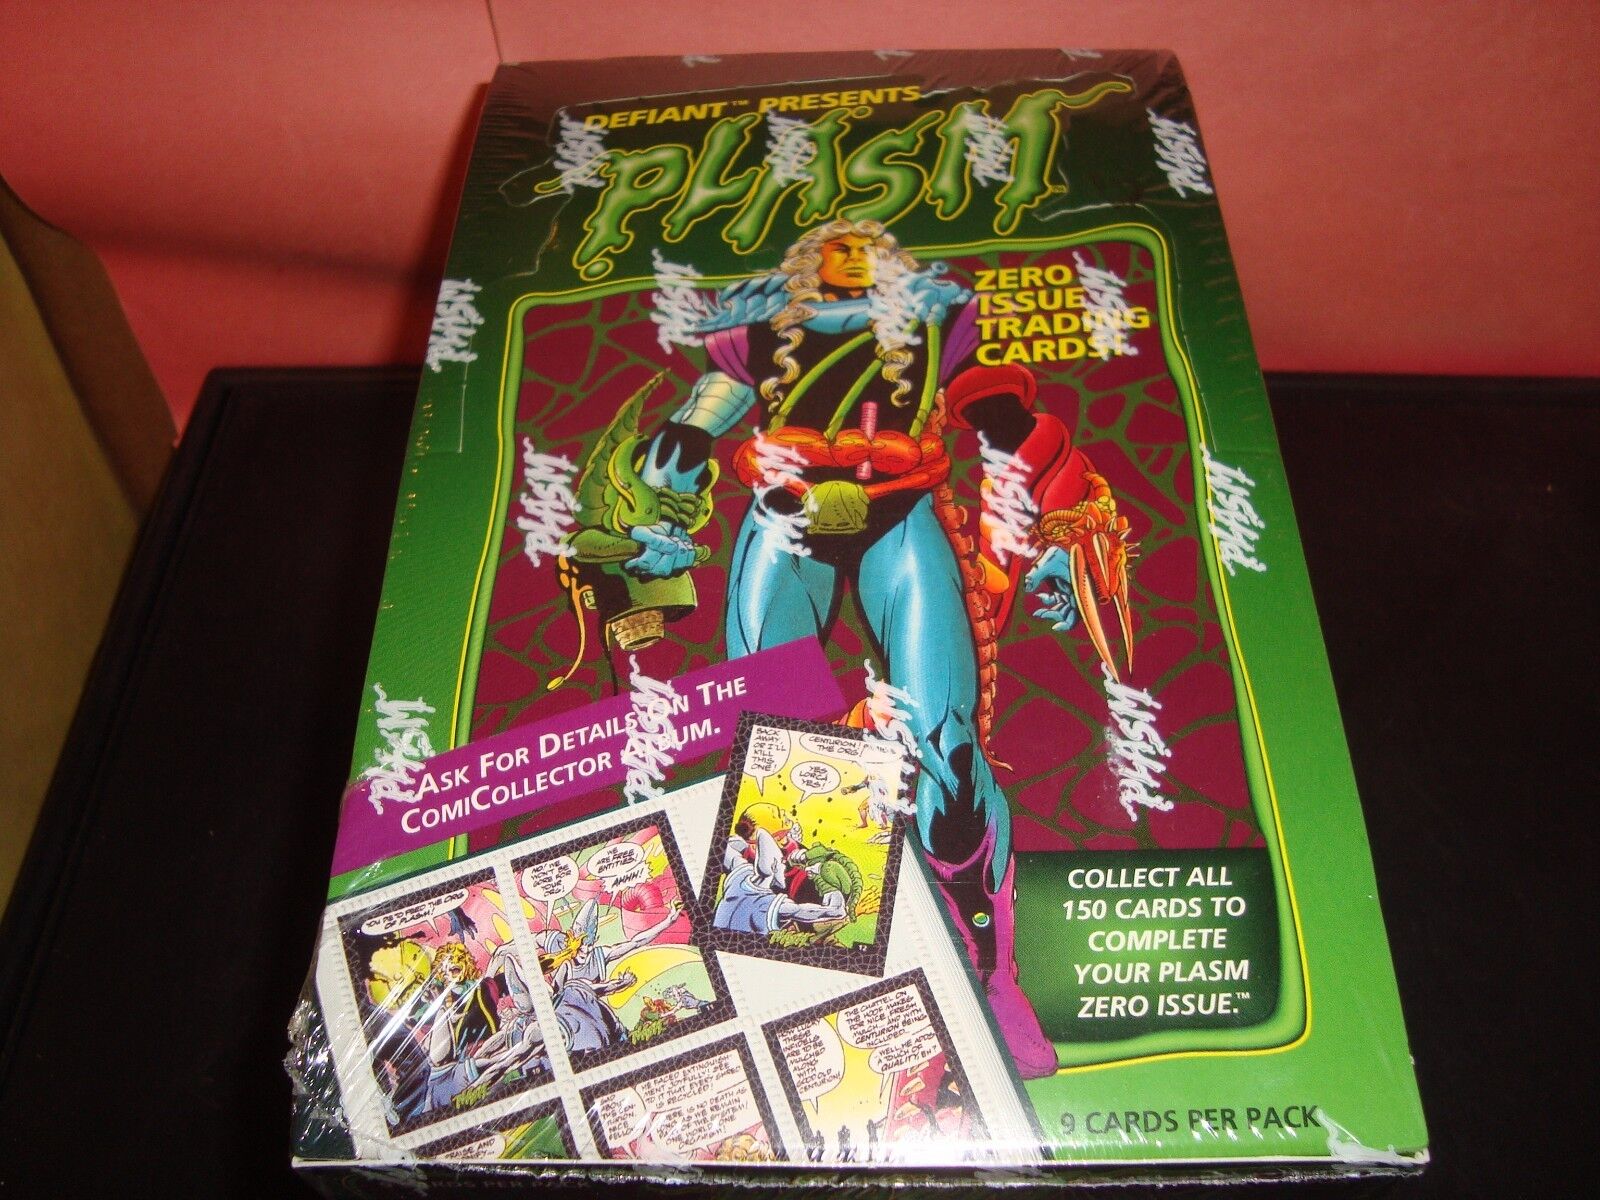 1993 Defiant Presents Plasm Zero Issue Comic Trading Cards Factory ...